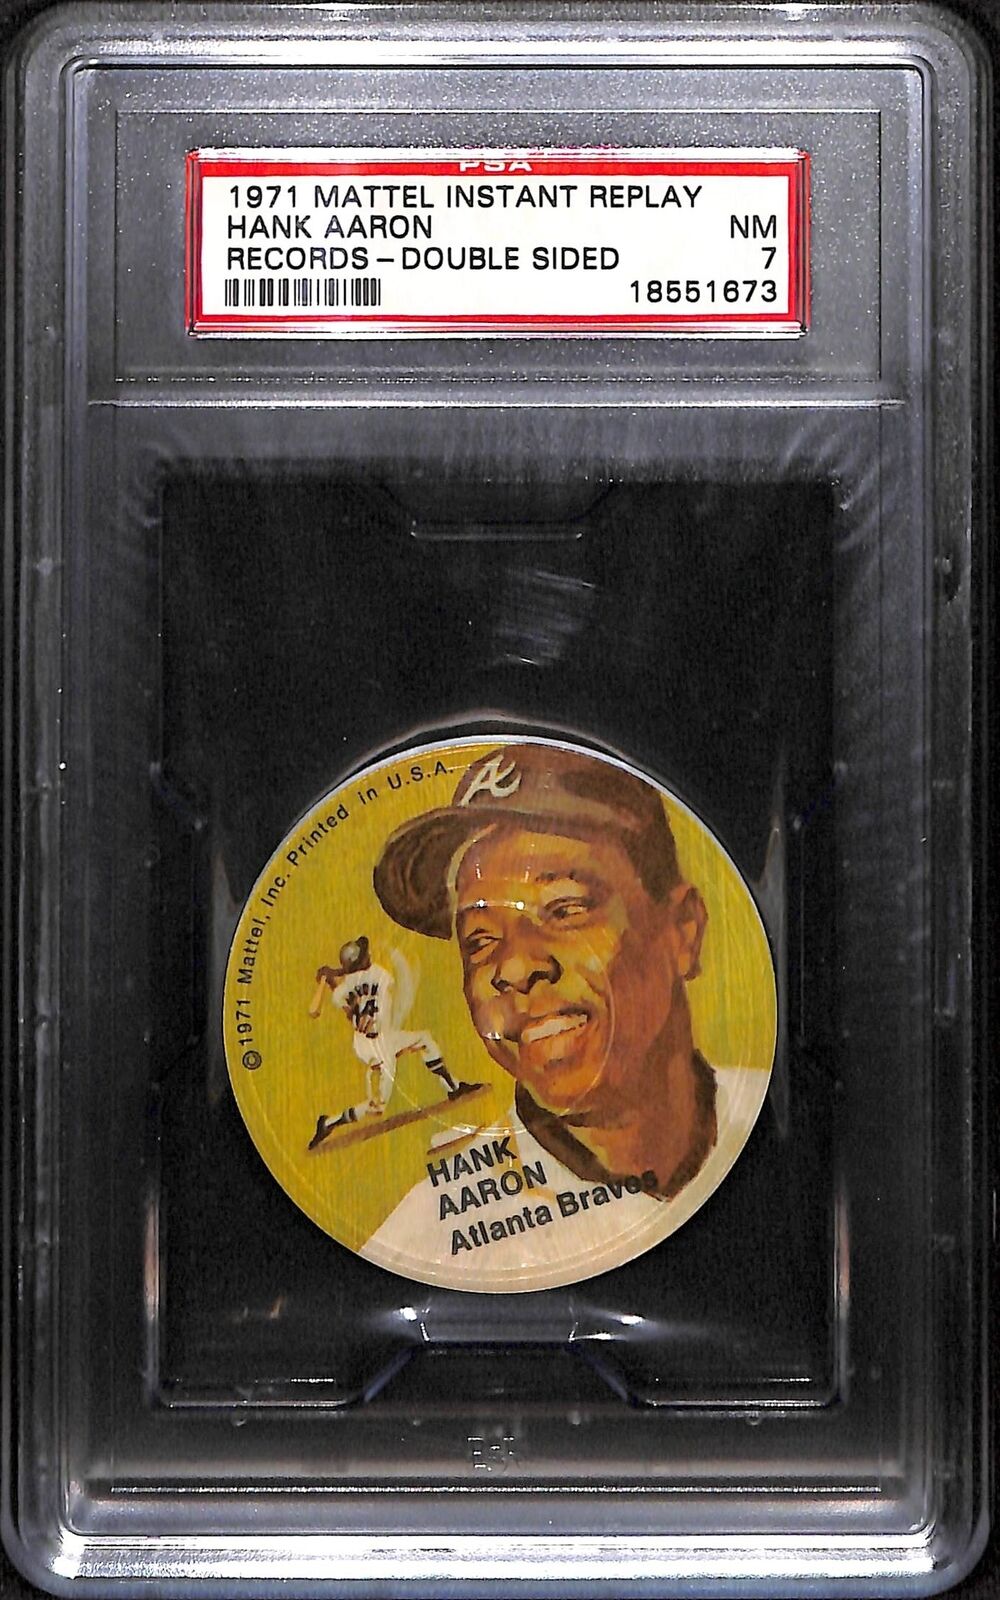 1971 MATTEL INSTANT REPLAY RECORDS  HANK AARON DOUBLE SIDED* PSA 7 18551673 